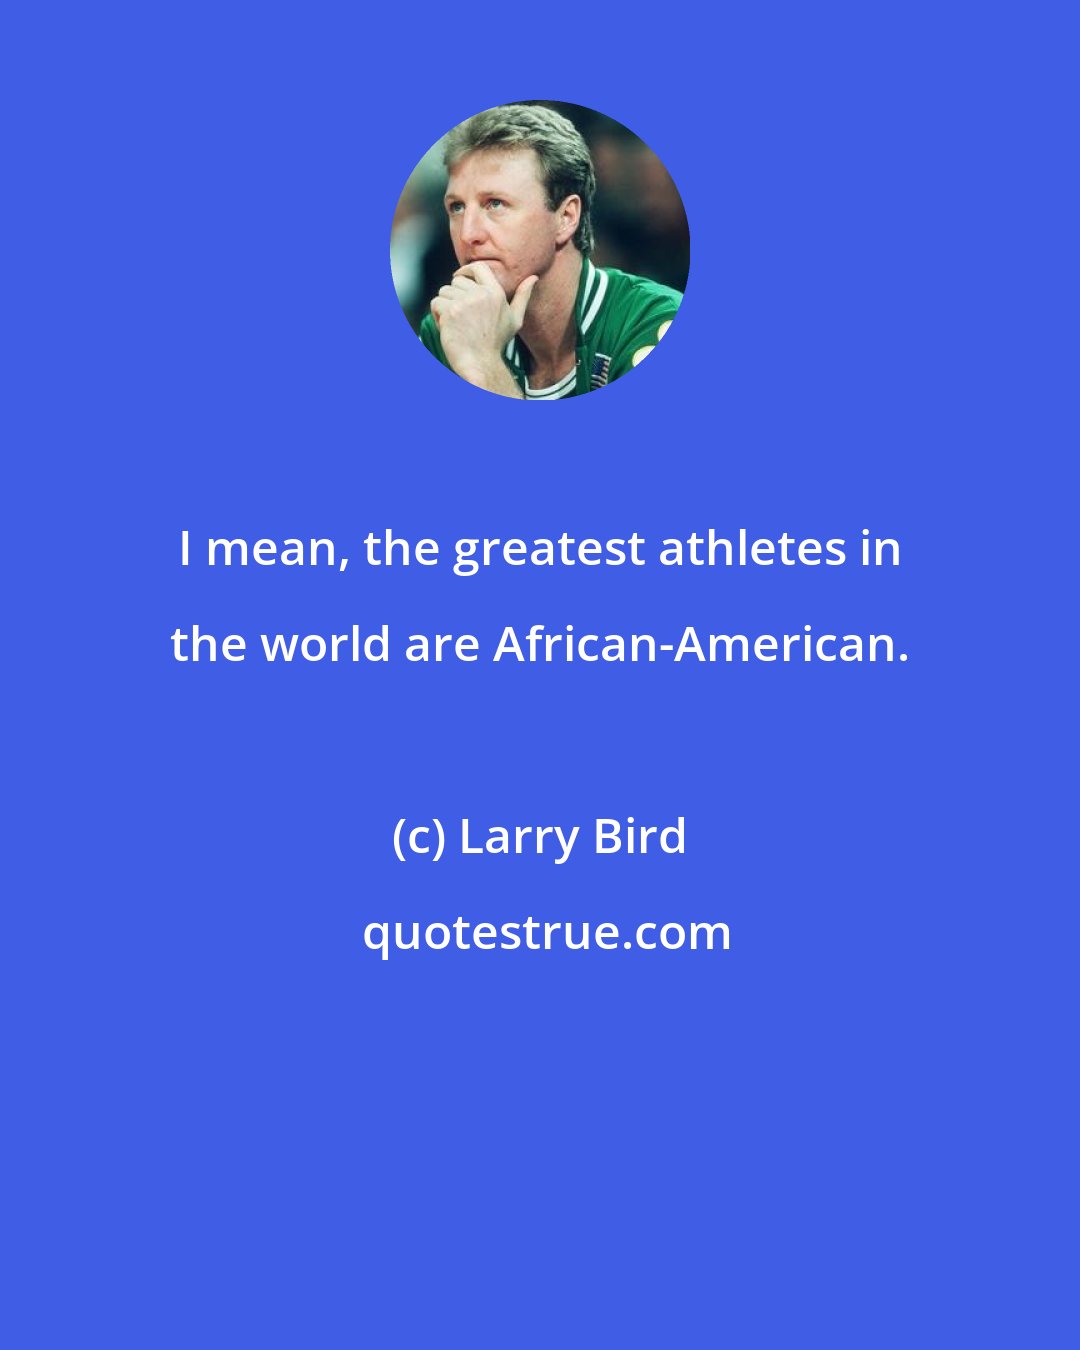 Larry Bird: I mean, the greatest athletes in the world are African-American.